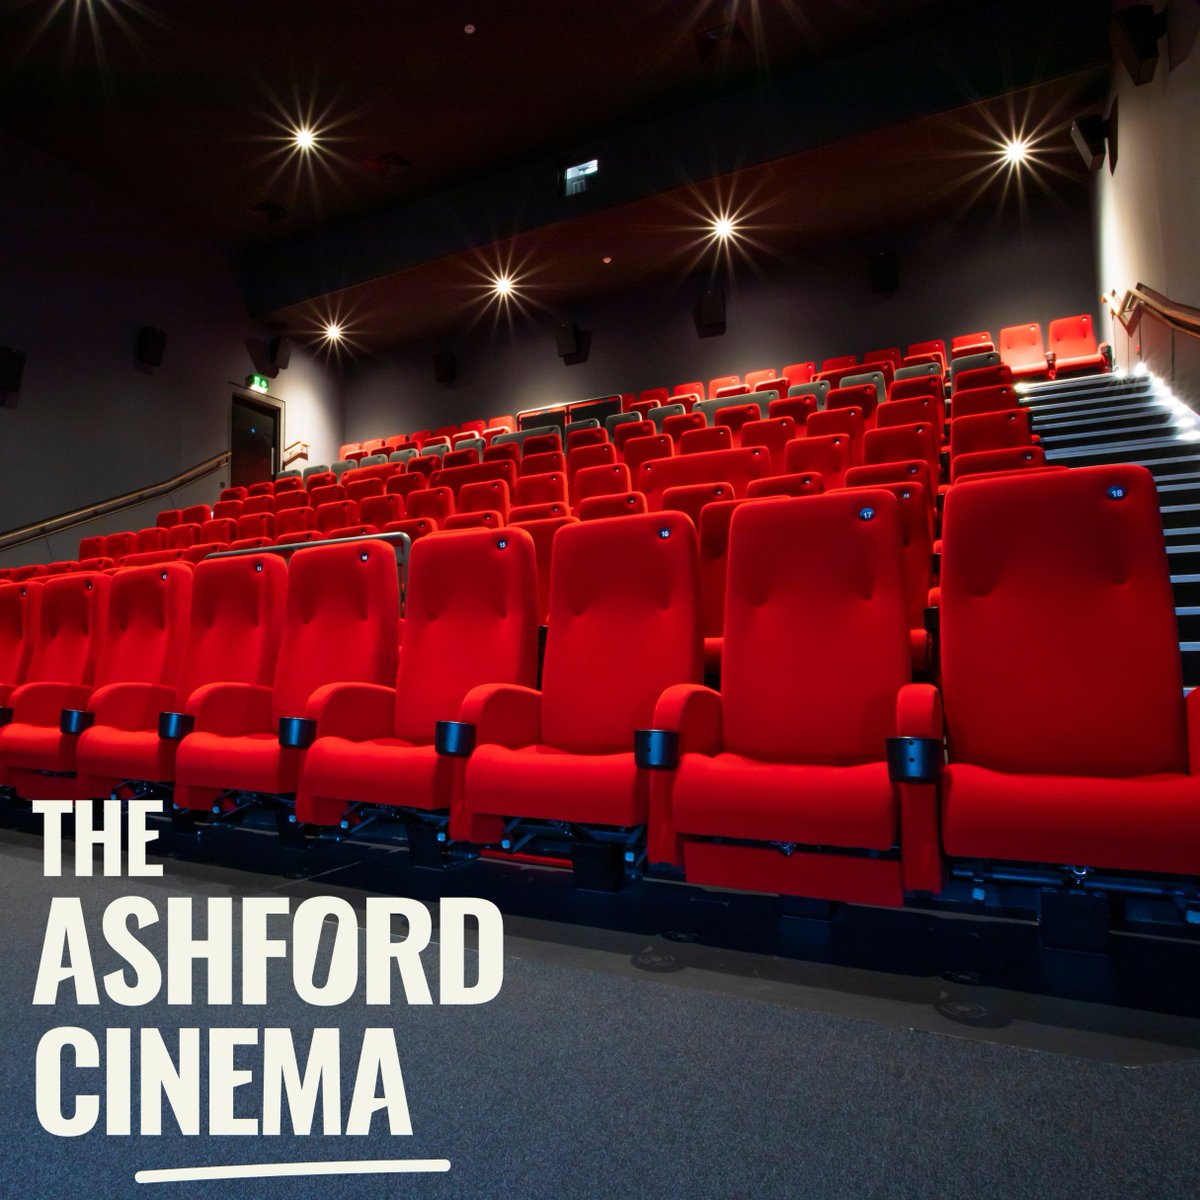 The Ashford Cinema is here! 🎞️ 🍿 @AshfordCouncil invests in the town by taking over the operation of the former Ashford Picturehouse cinema. Read more 👉 orlo.uk/S3ewa